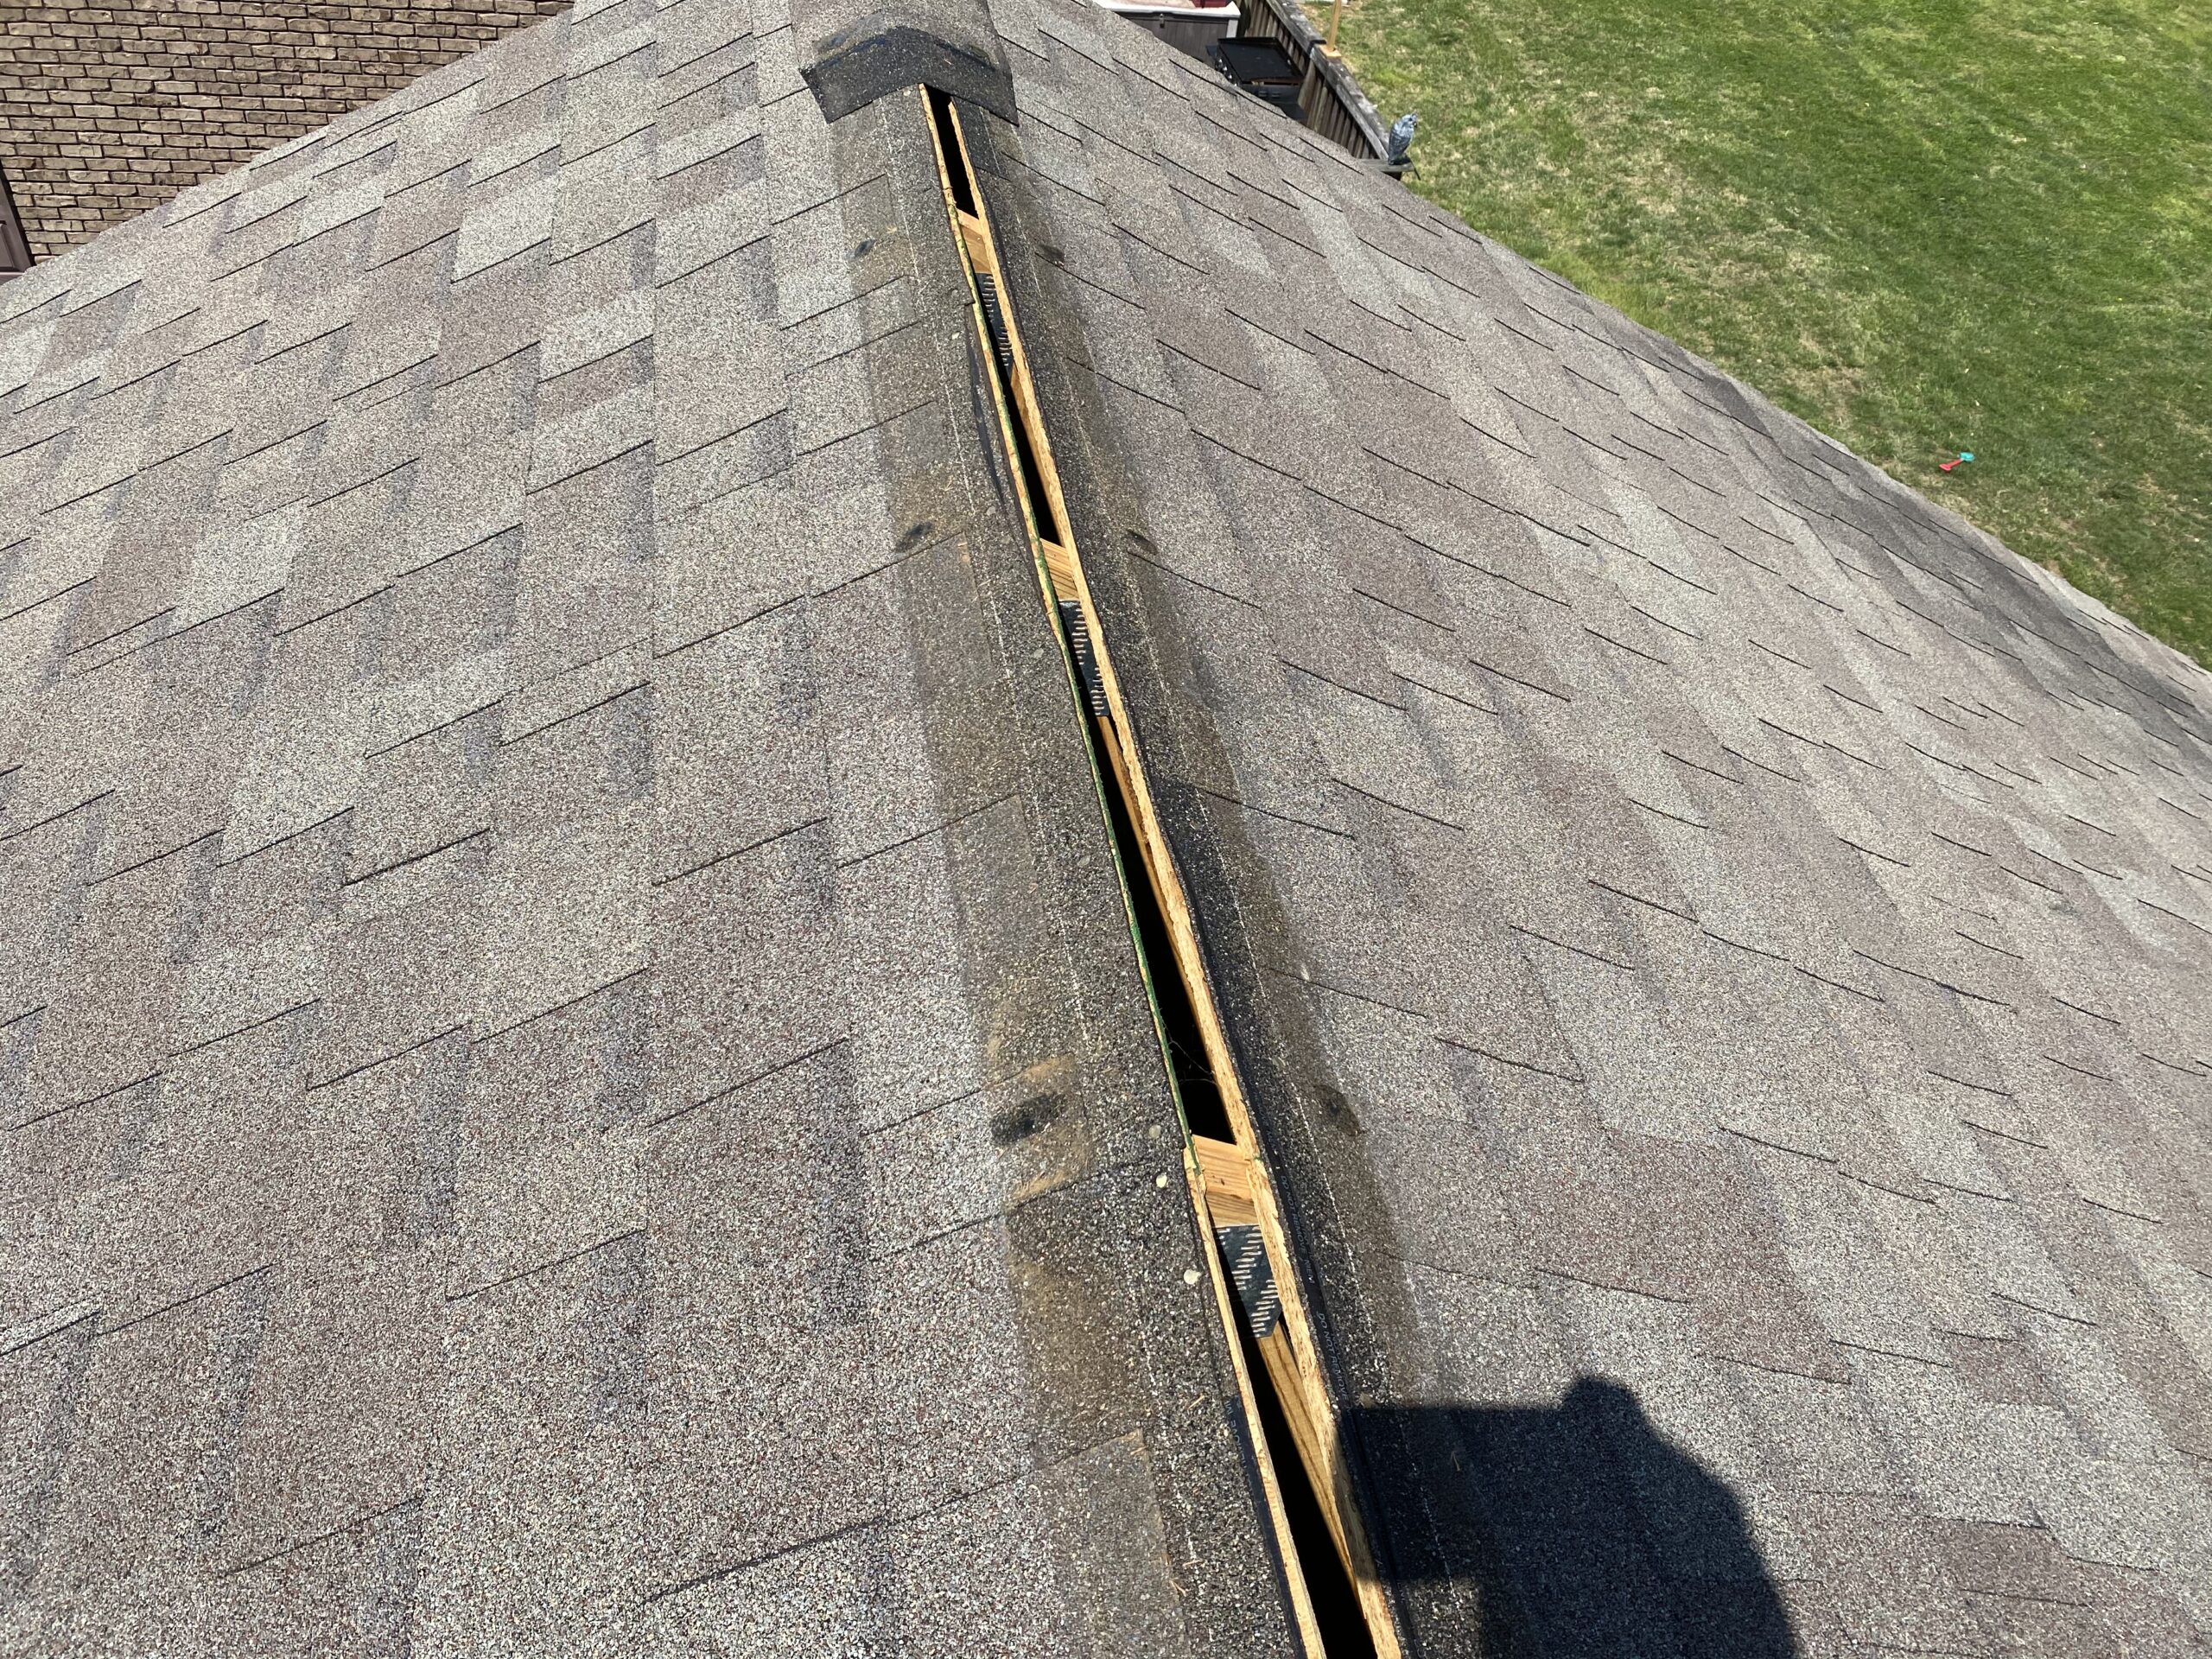 This is a picture of an open ridge with weather wood shingles